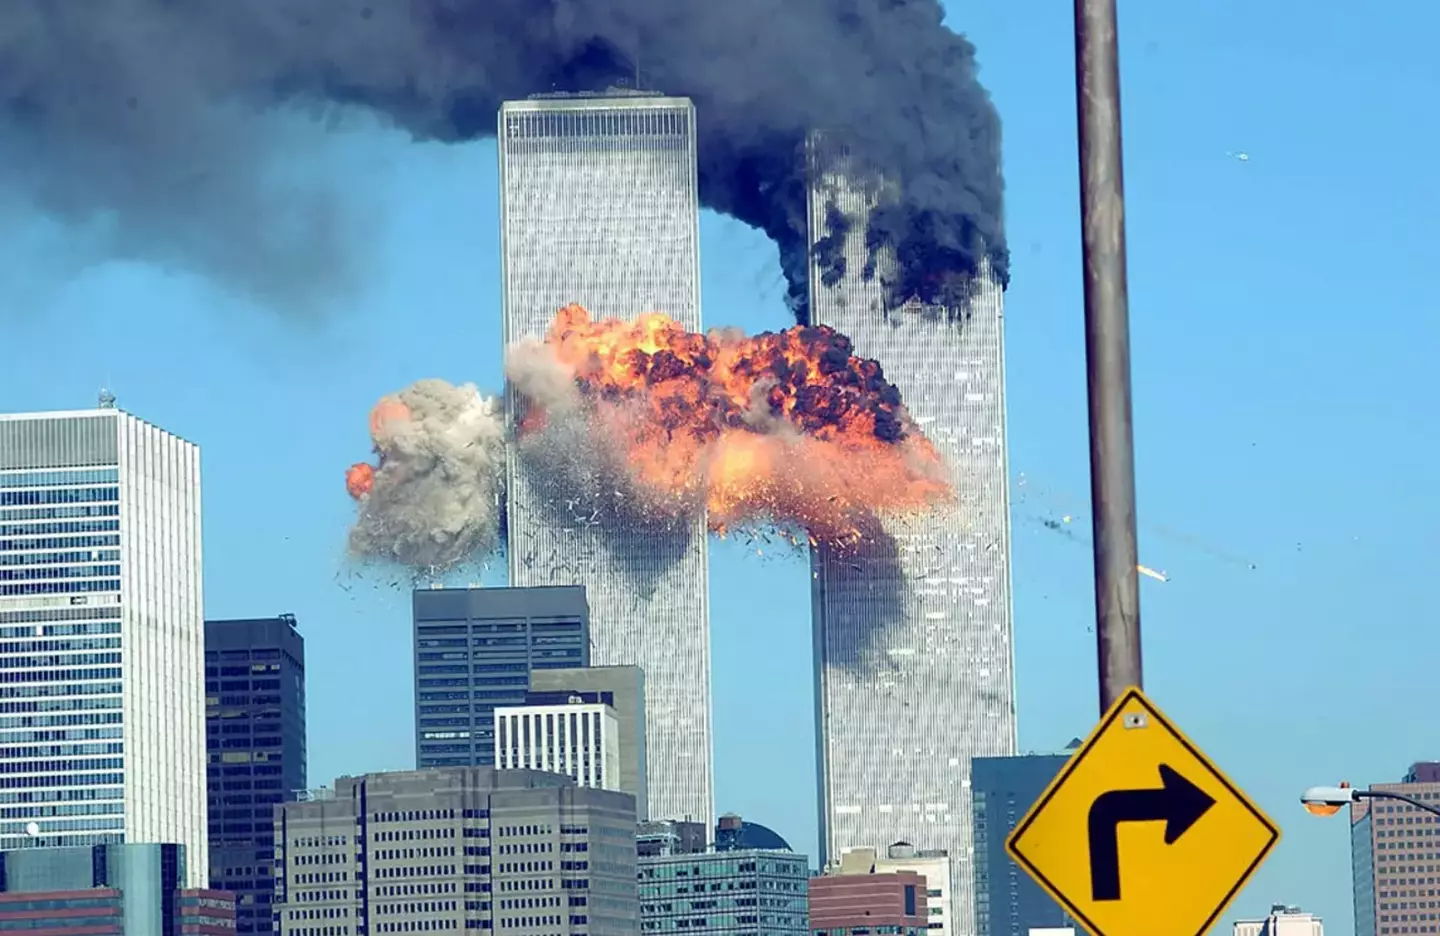 9/11 saw almost 3,000 people lose their lives.